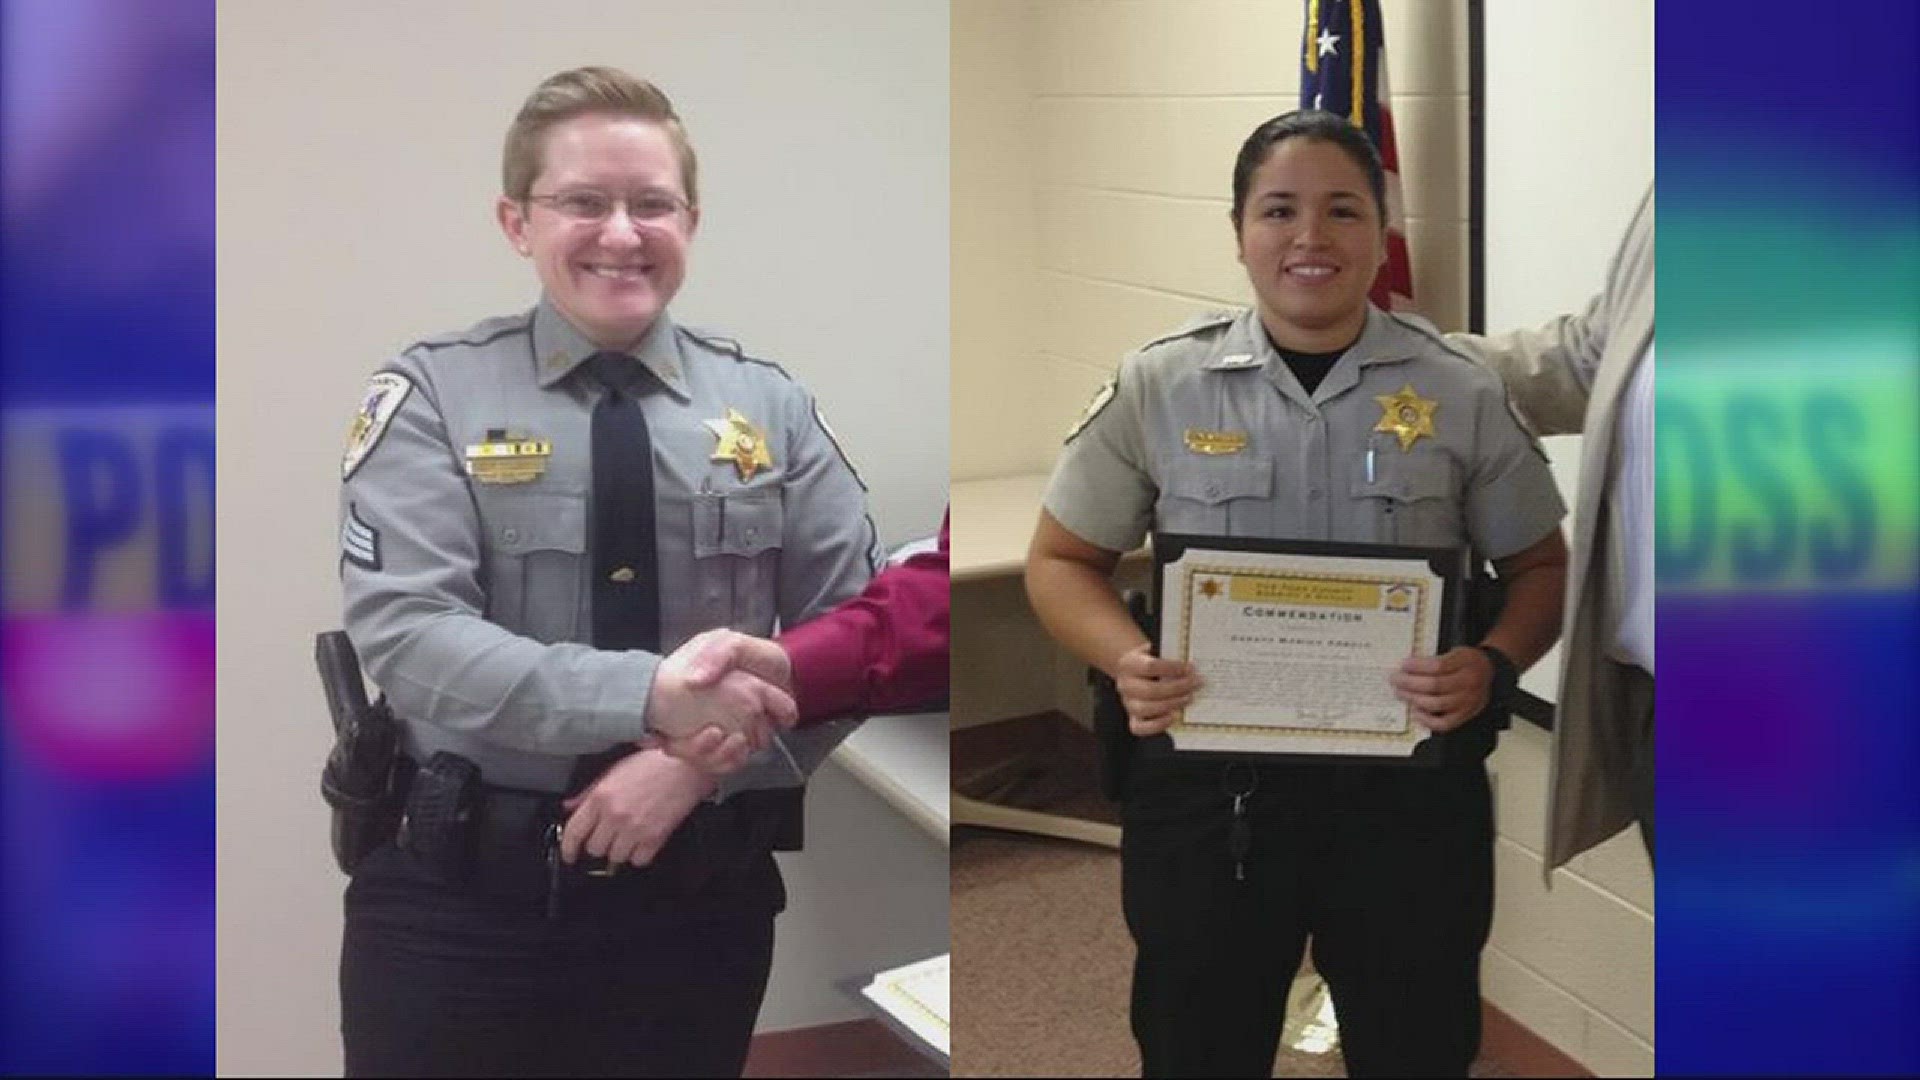 York County Sheriff's Office says two of its female deputies have resigned after engaging in sexual conduct while on duty.